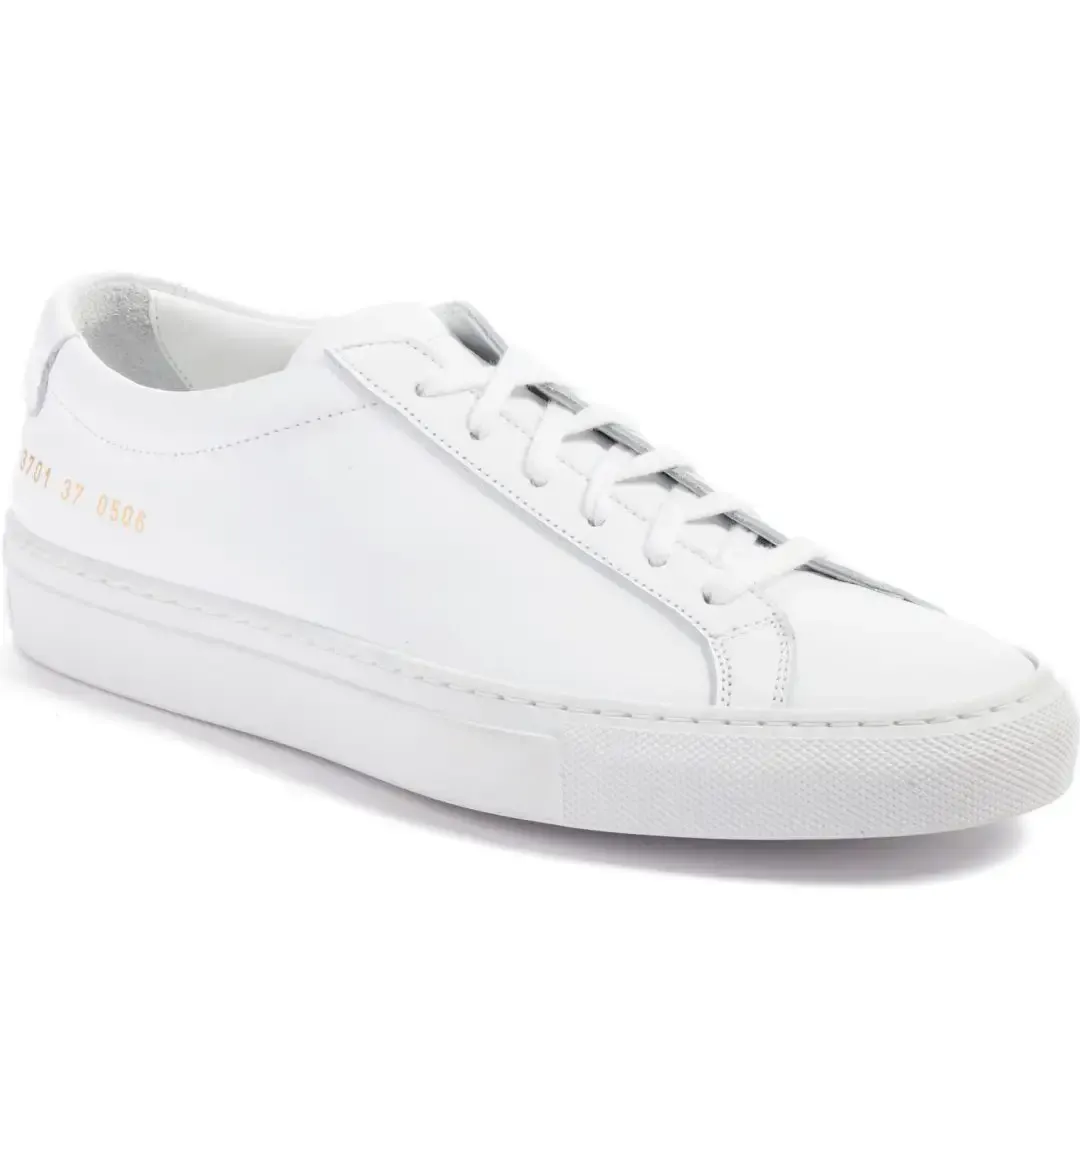 Baskets Achilles originales Common Projects blanches